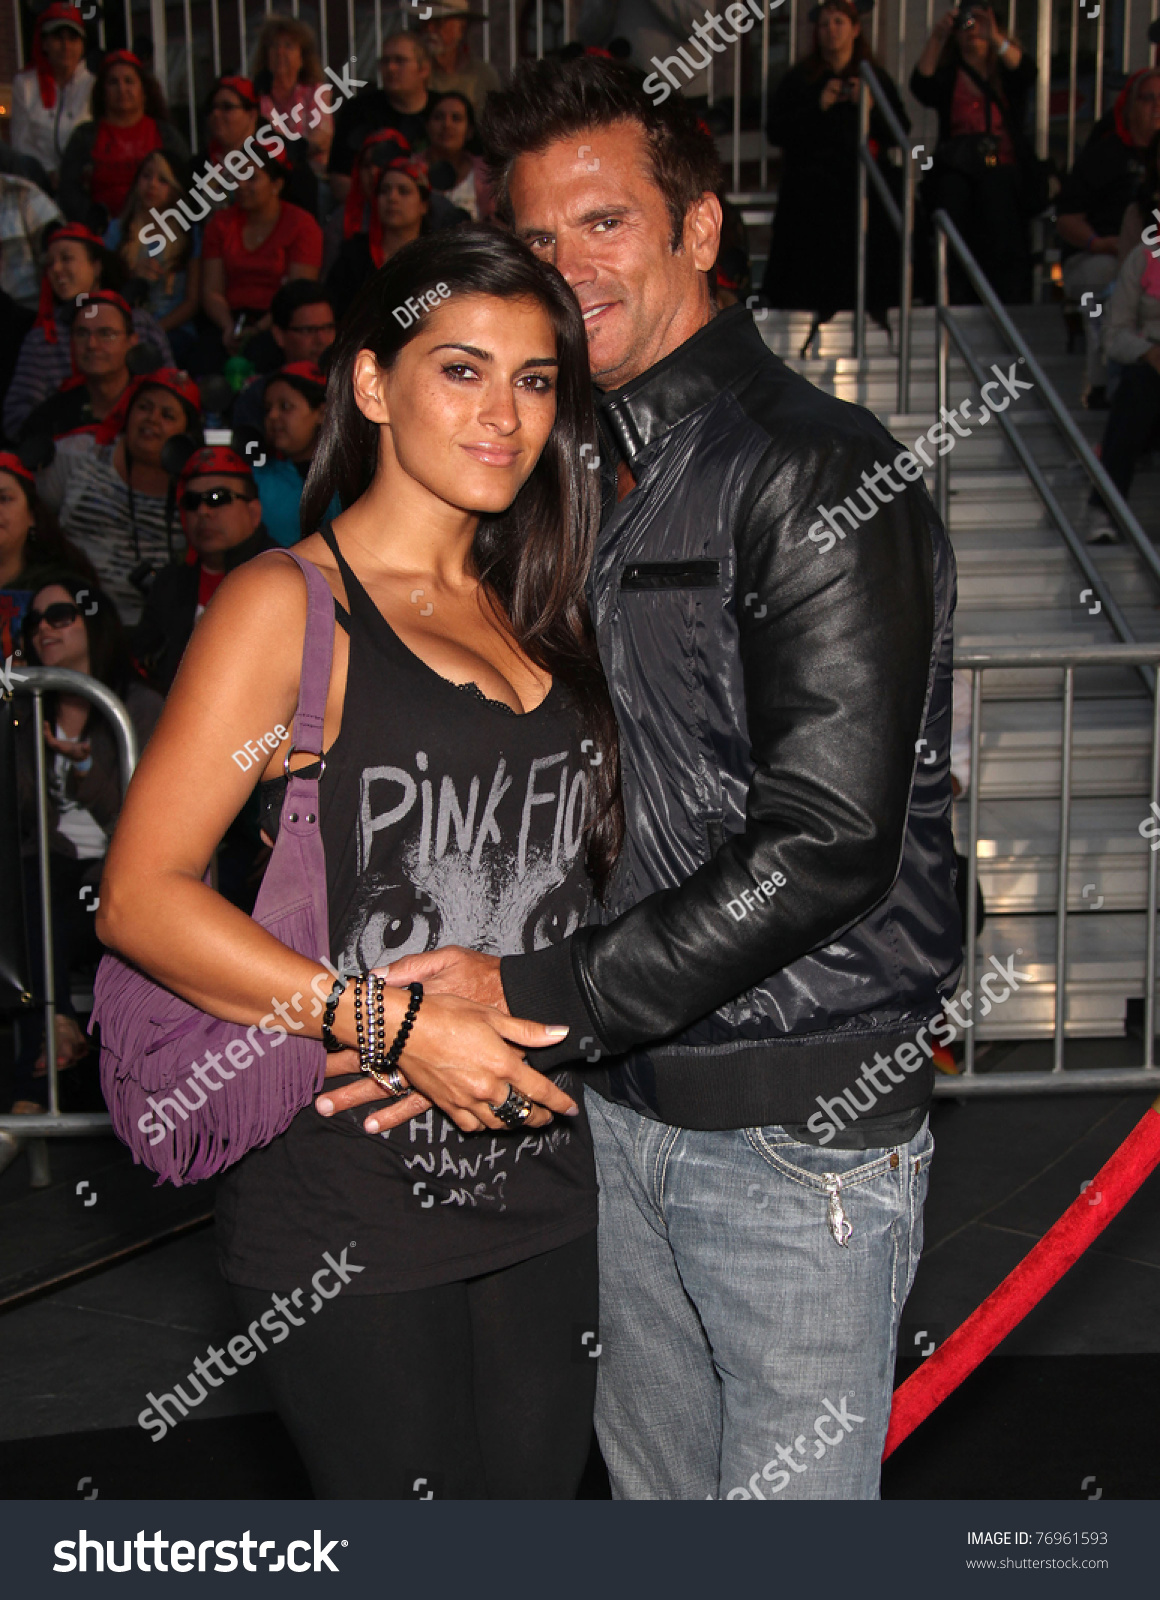 Los Angeles - May 07: Lorenzo Lamas & Wife Arrives To The 